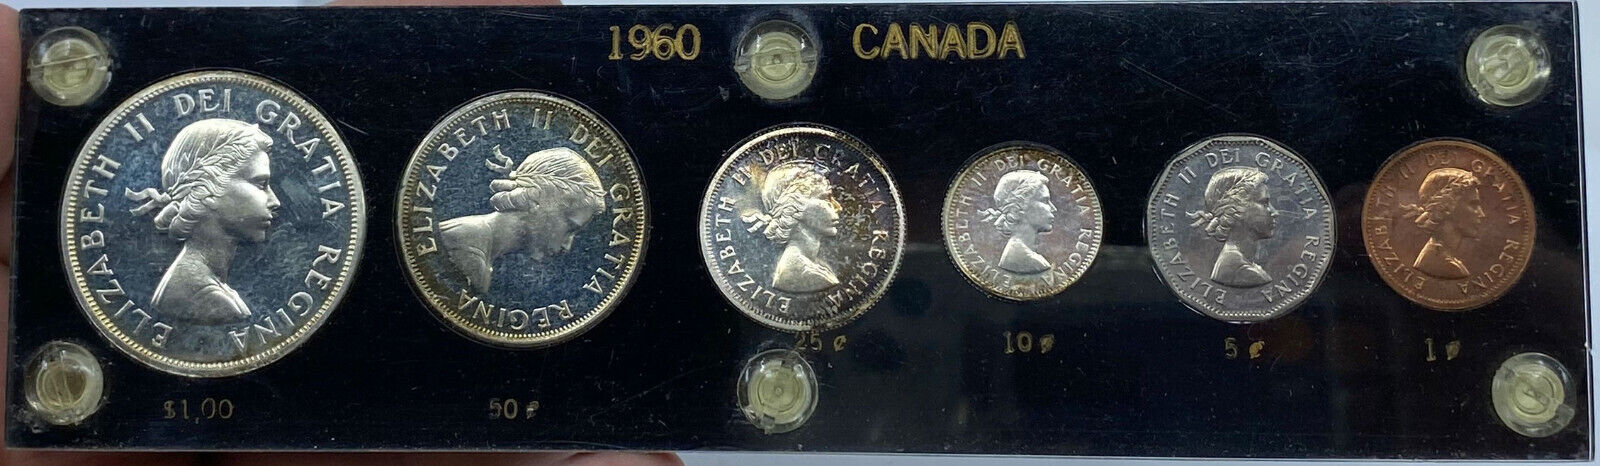 1960 CANADA - 4 Silver - 6 COINS Total Canadian Mint UNCIRCULATED SET i119427